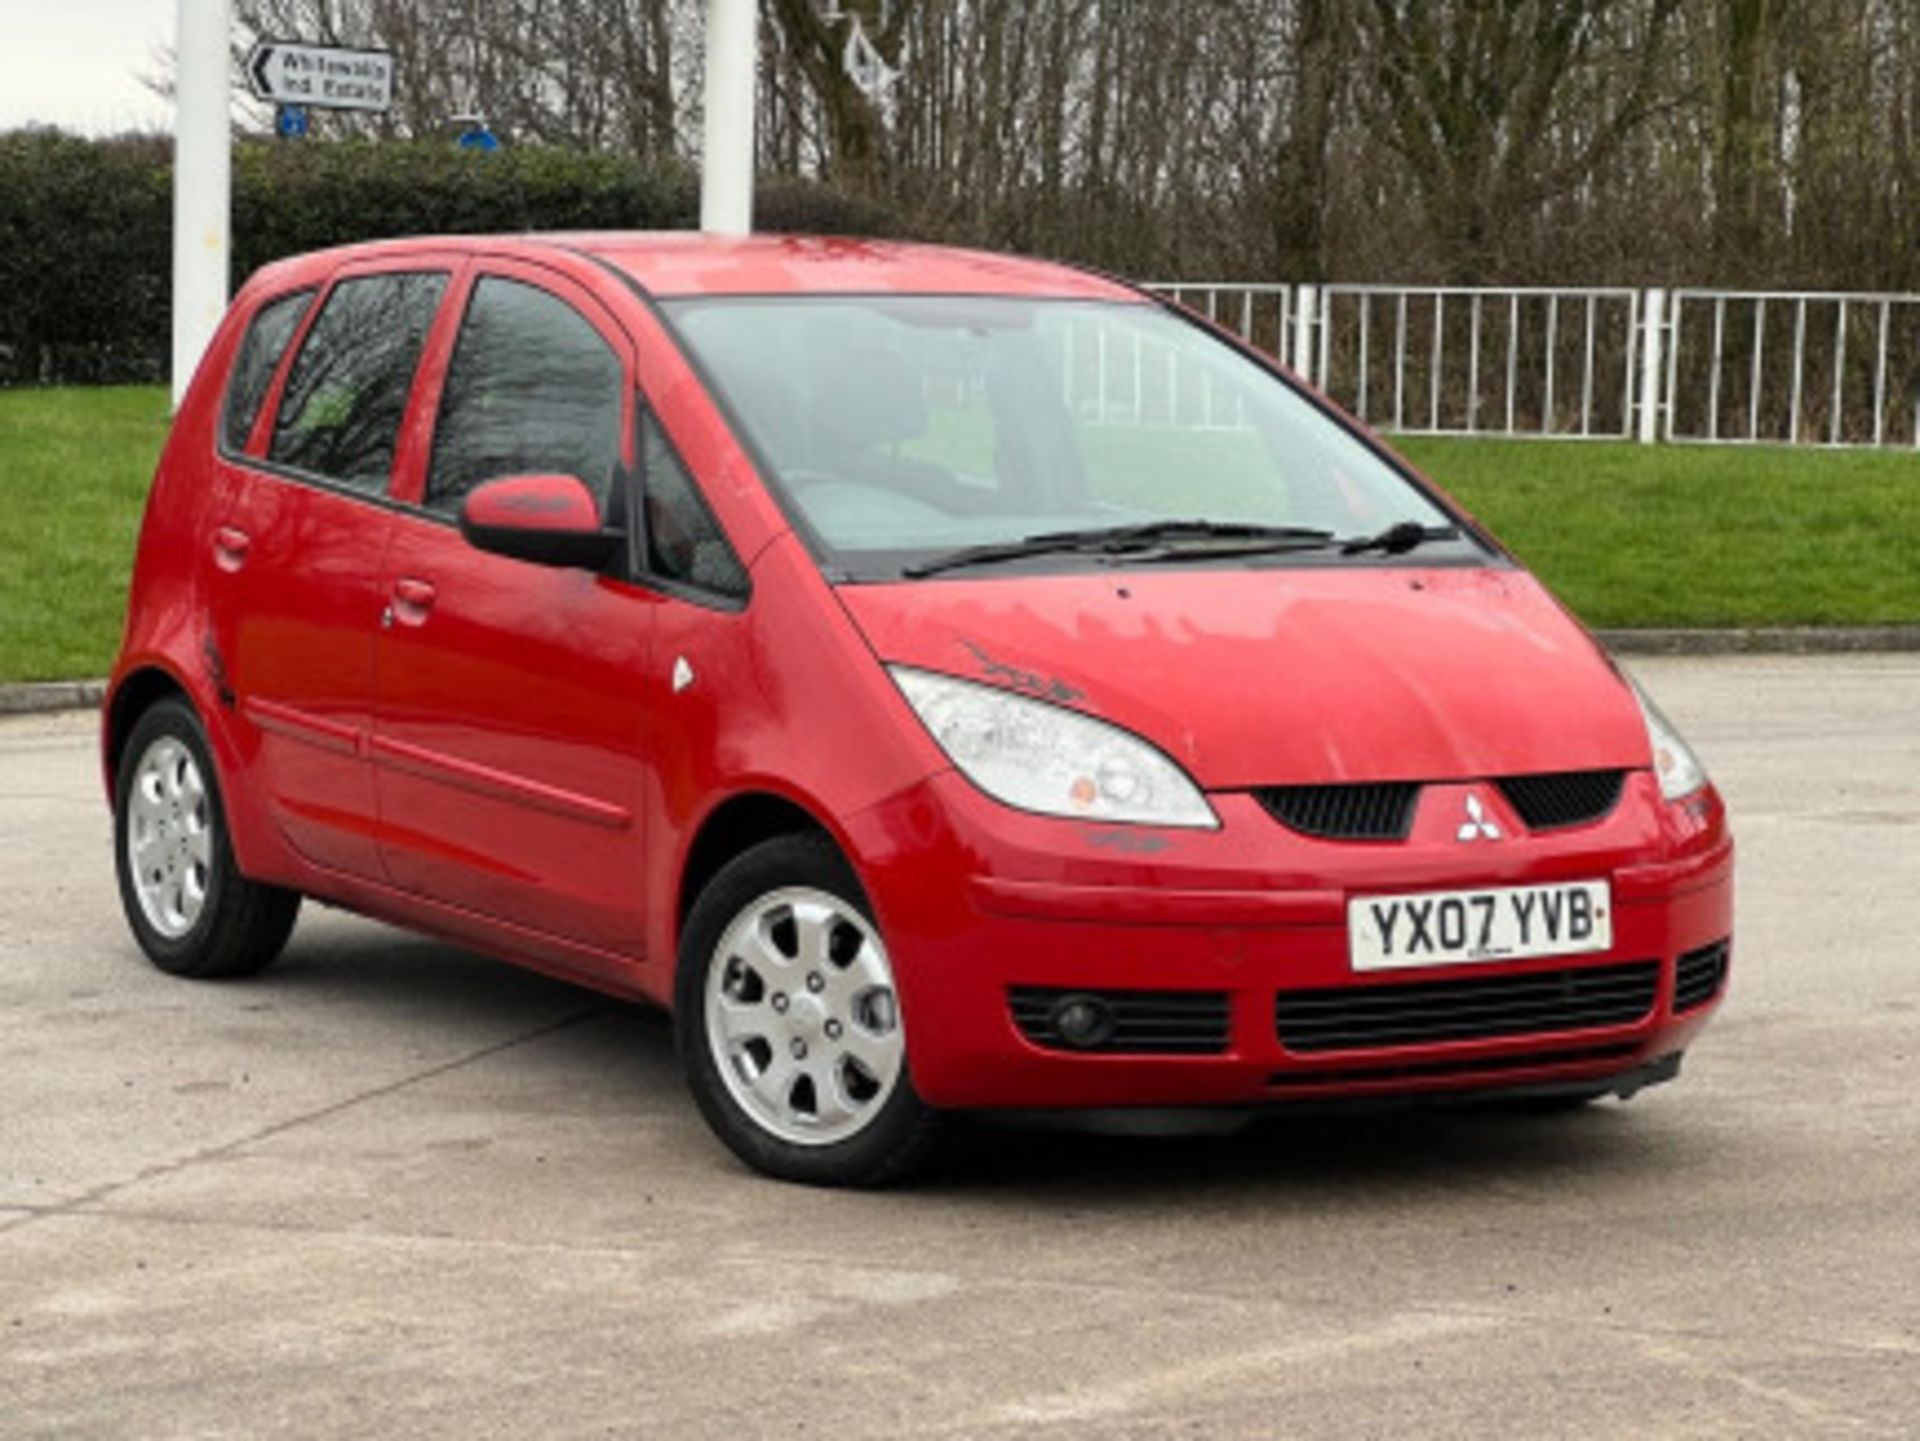 2007 MITSUBISHI COLT 1.5 DI-D DIESEL AUTOMATIC >>--NO VAT ON HAMMER--<< - Image 86 of 191